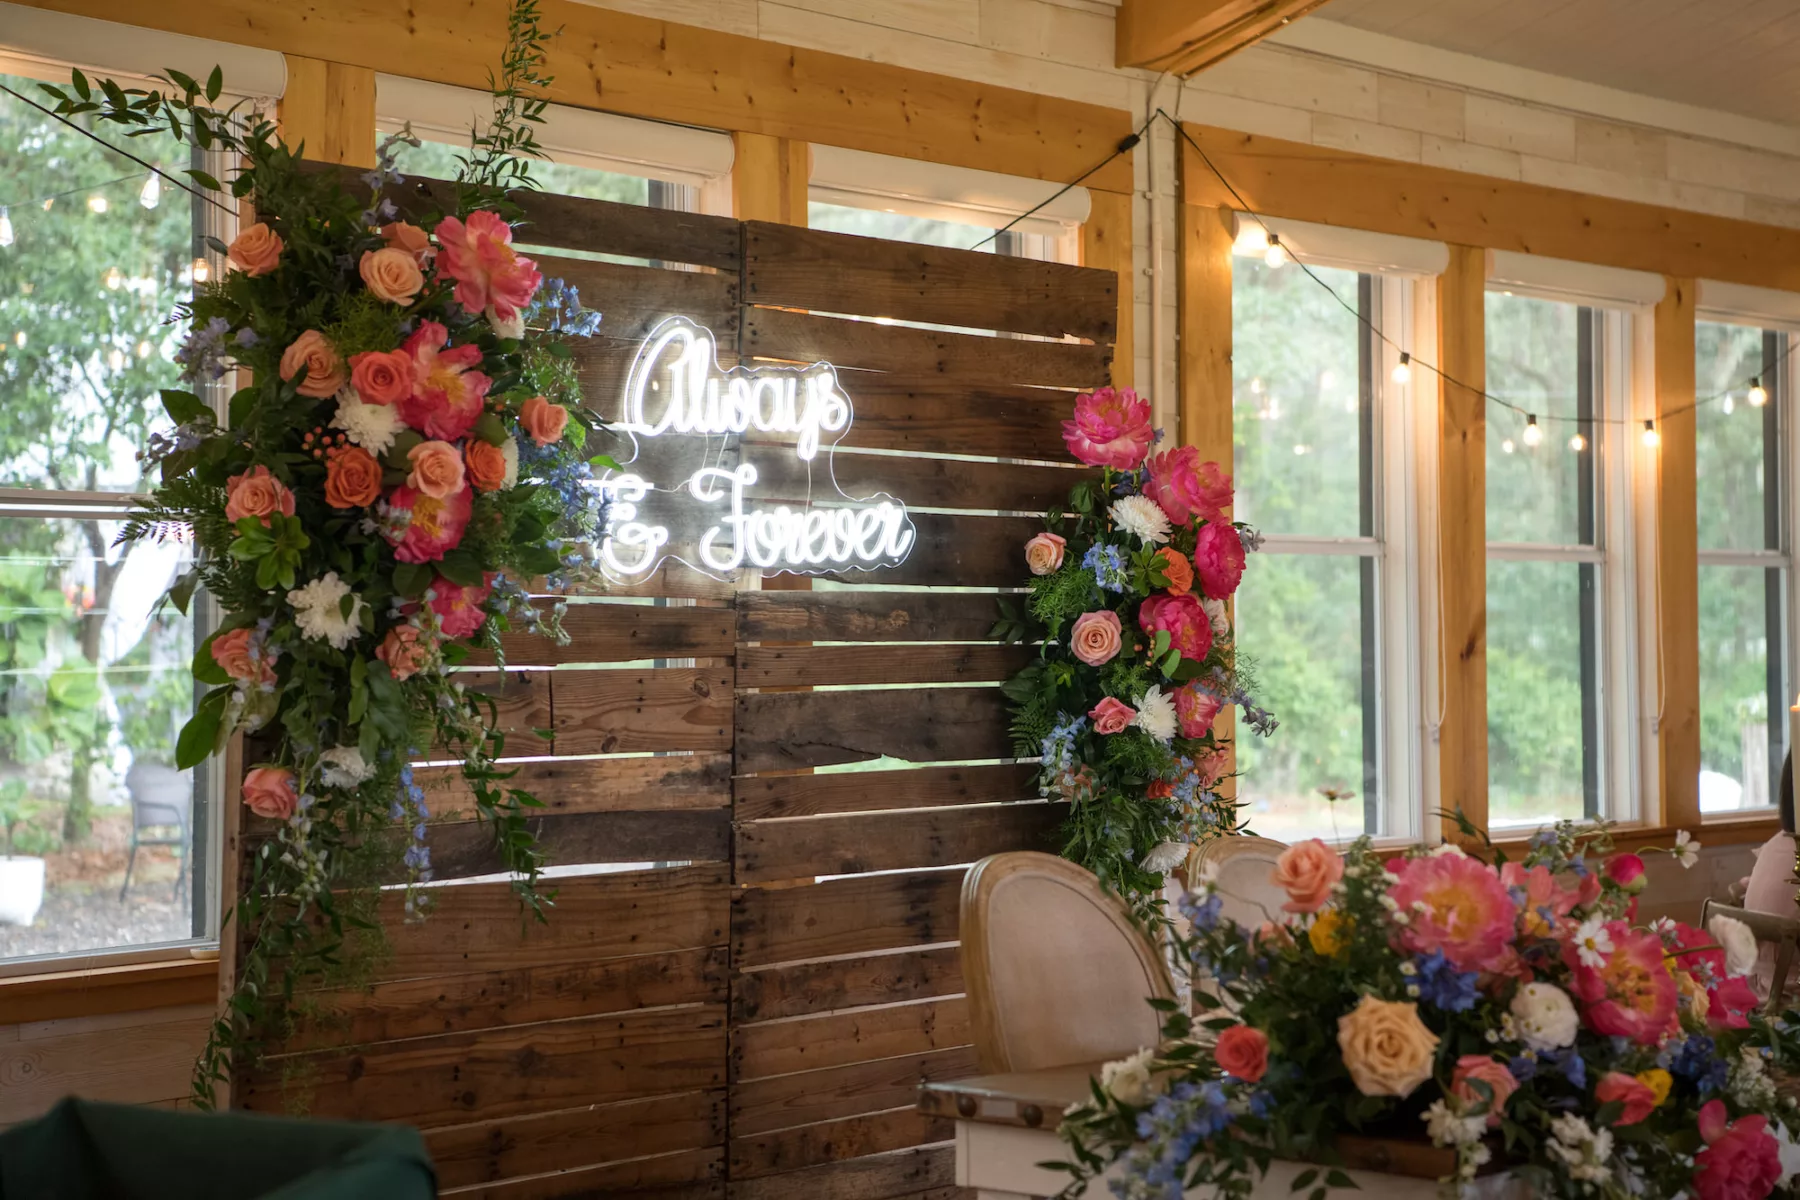 Pallet Wood Wedding Reception Sweetheart Table Backdrop Decor with Always and Forever Neon Sign Inspiration | Pink Peony, Orange Roses, White Chrysanthemums, Blue Delphinium Floral Arrangement Ideas